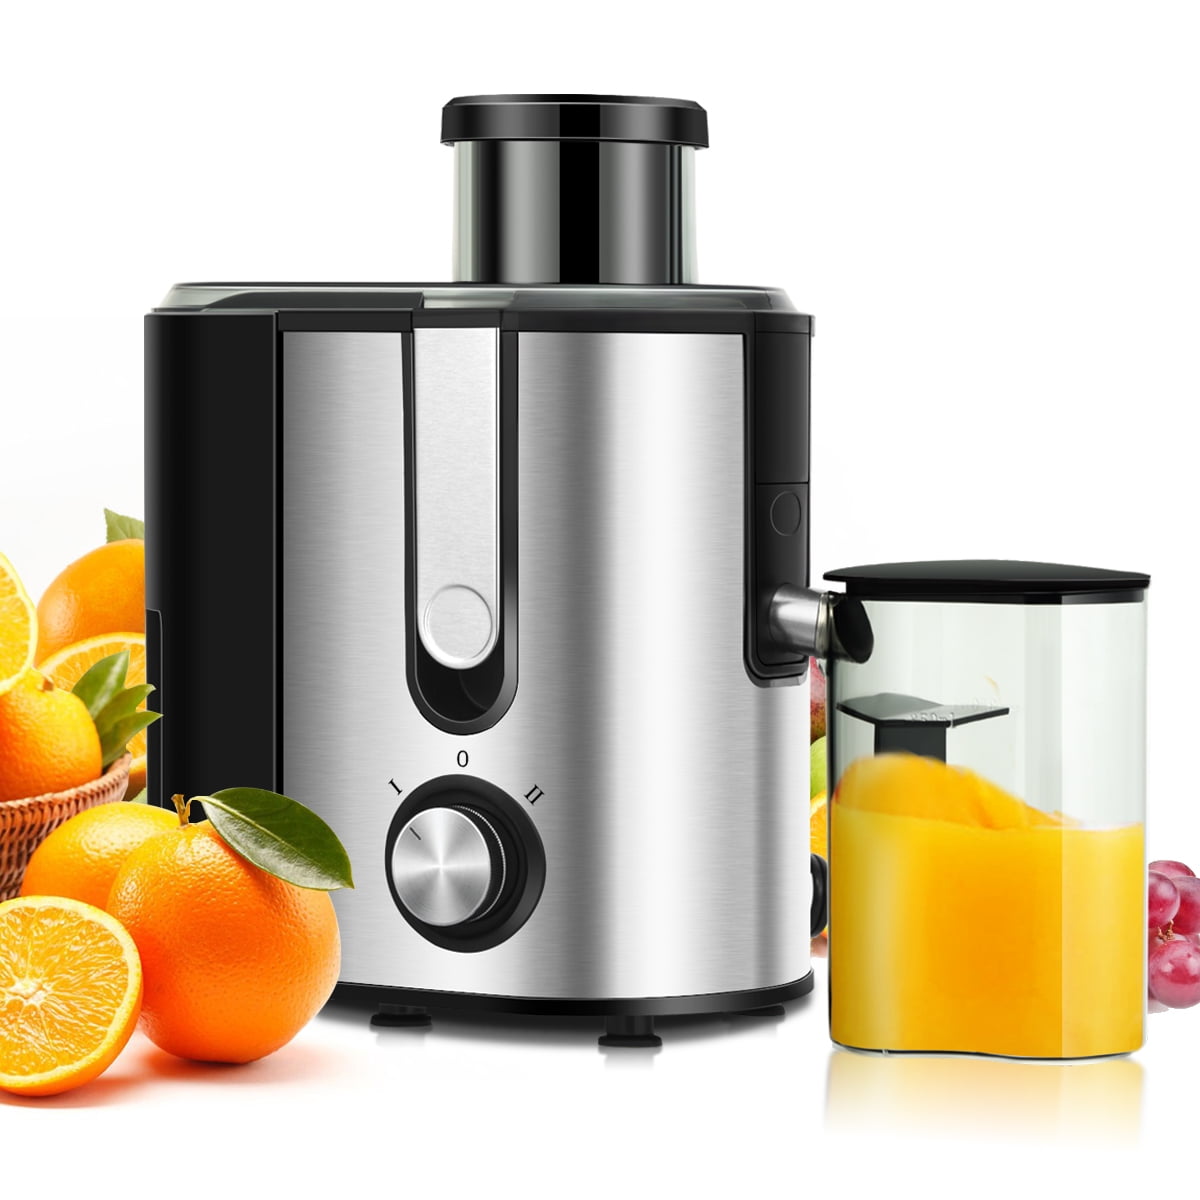 Juice Extractor with Spout Adjustable Joerid Centrifugal Juicer Easy to Clean & BPA-Free Juicer Machines, Black - 400W Lighter & Powerful Included Brush 2020 Upgrade Dishwasher Safe 